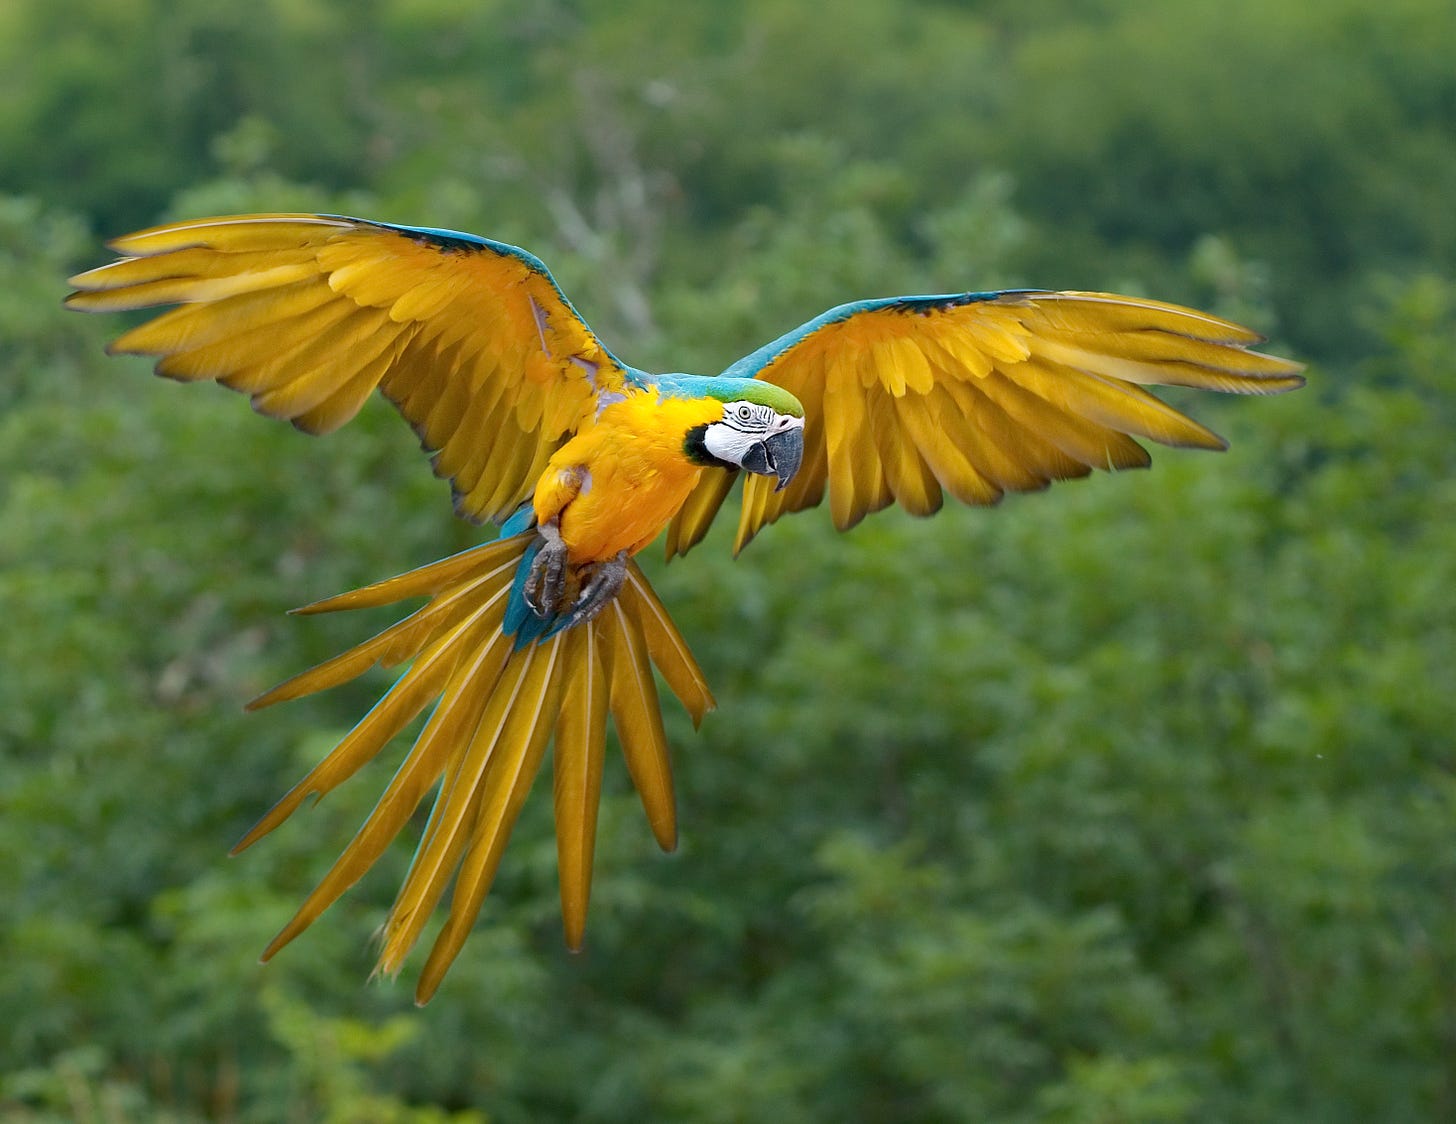 A female blue-and-gold macaw, seen from below mid-flight, with wings and tail feathers fully spread against a backdrop of green treetops.